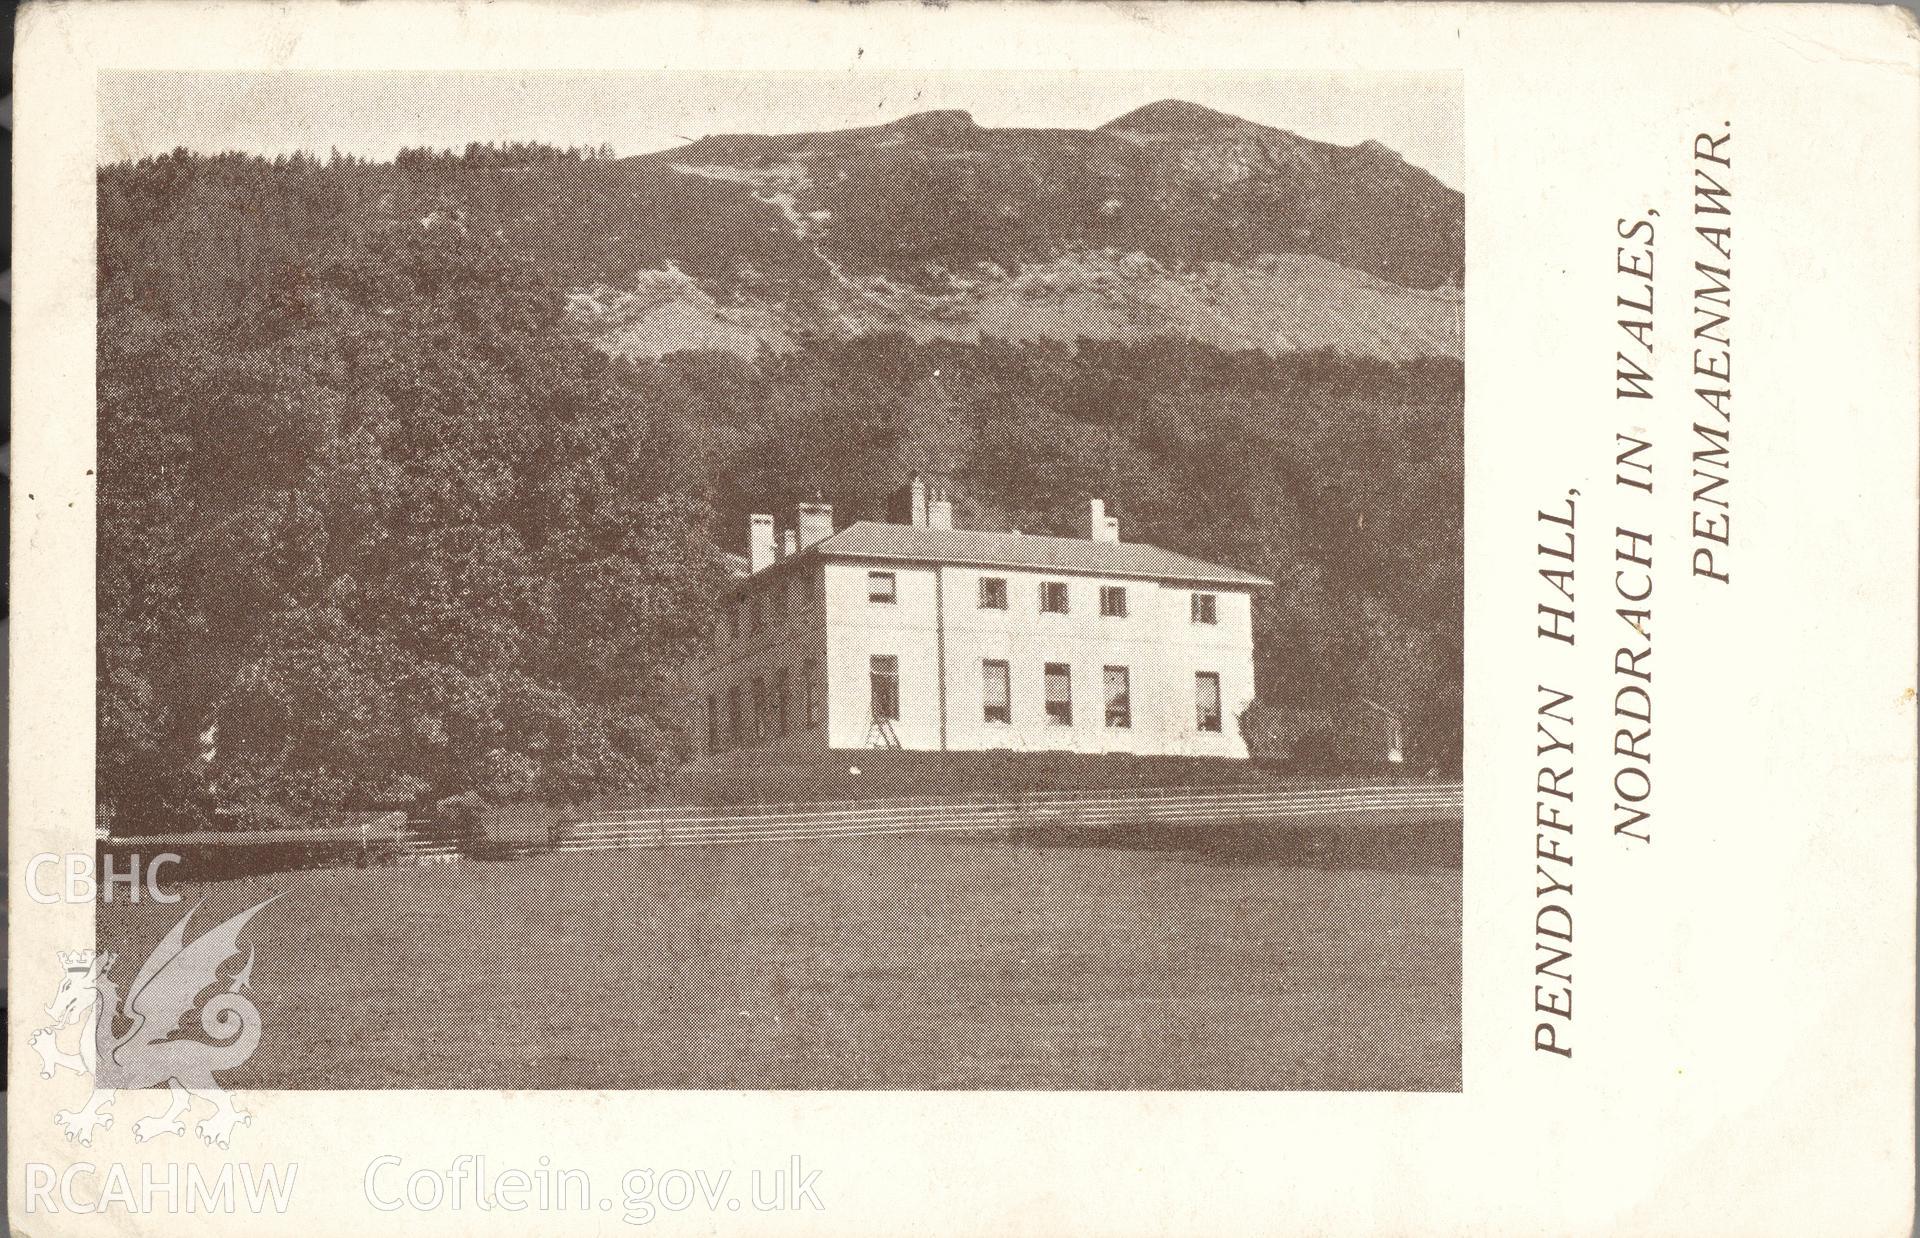 Digitised postcard image of Pendyffryn Hall, Penmaenmawr, San Bride Post Card. Produced by Parks and Gardens Data Services, from an original item in the Peter Davis Collection at Parks and Gardens UK. We hold only web-resolution images of this collection, suitable for viewing on screen and for research purposes only. We do not hold the original images, or publication quality scans.